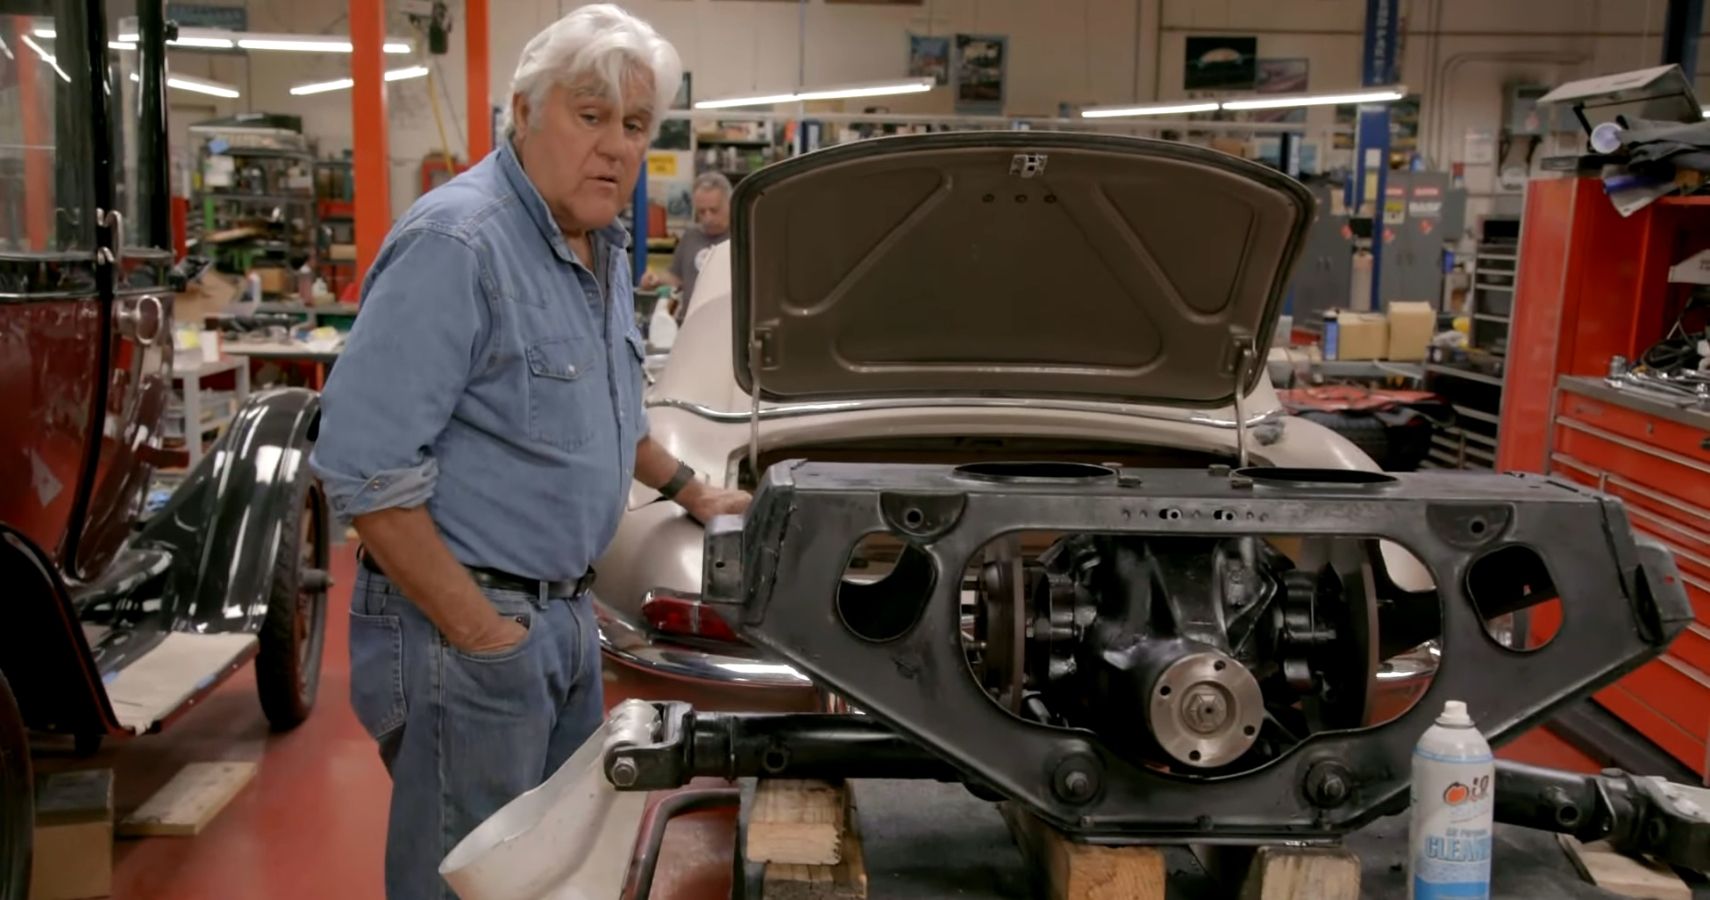 Jay Leno Jaguar XKE Restoration With Leno Checking Out Rear End